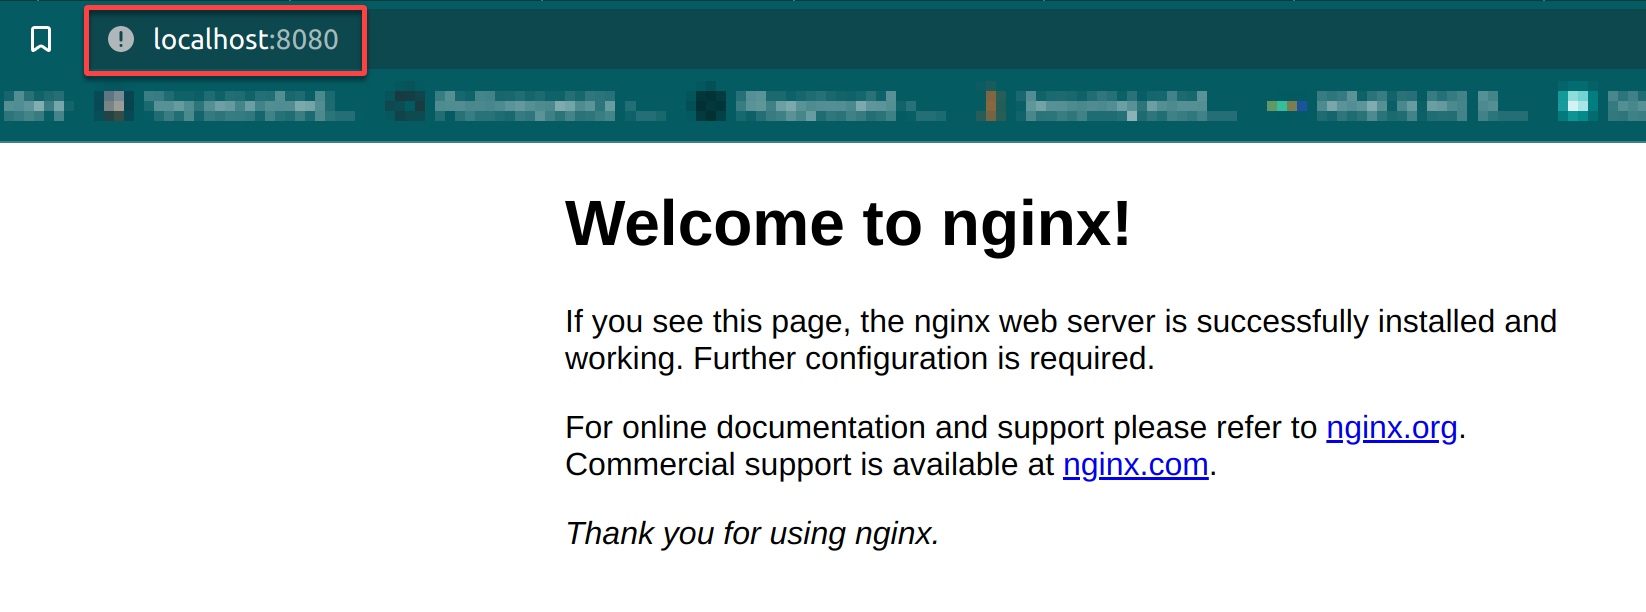 Accessing the NGINX welcome page on port 8000